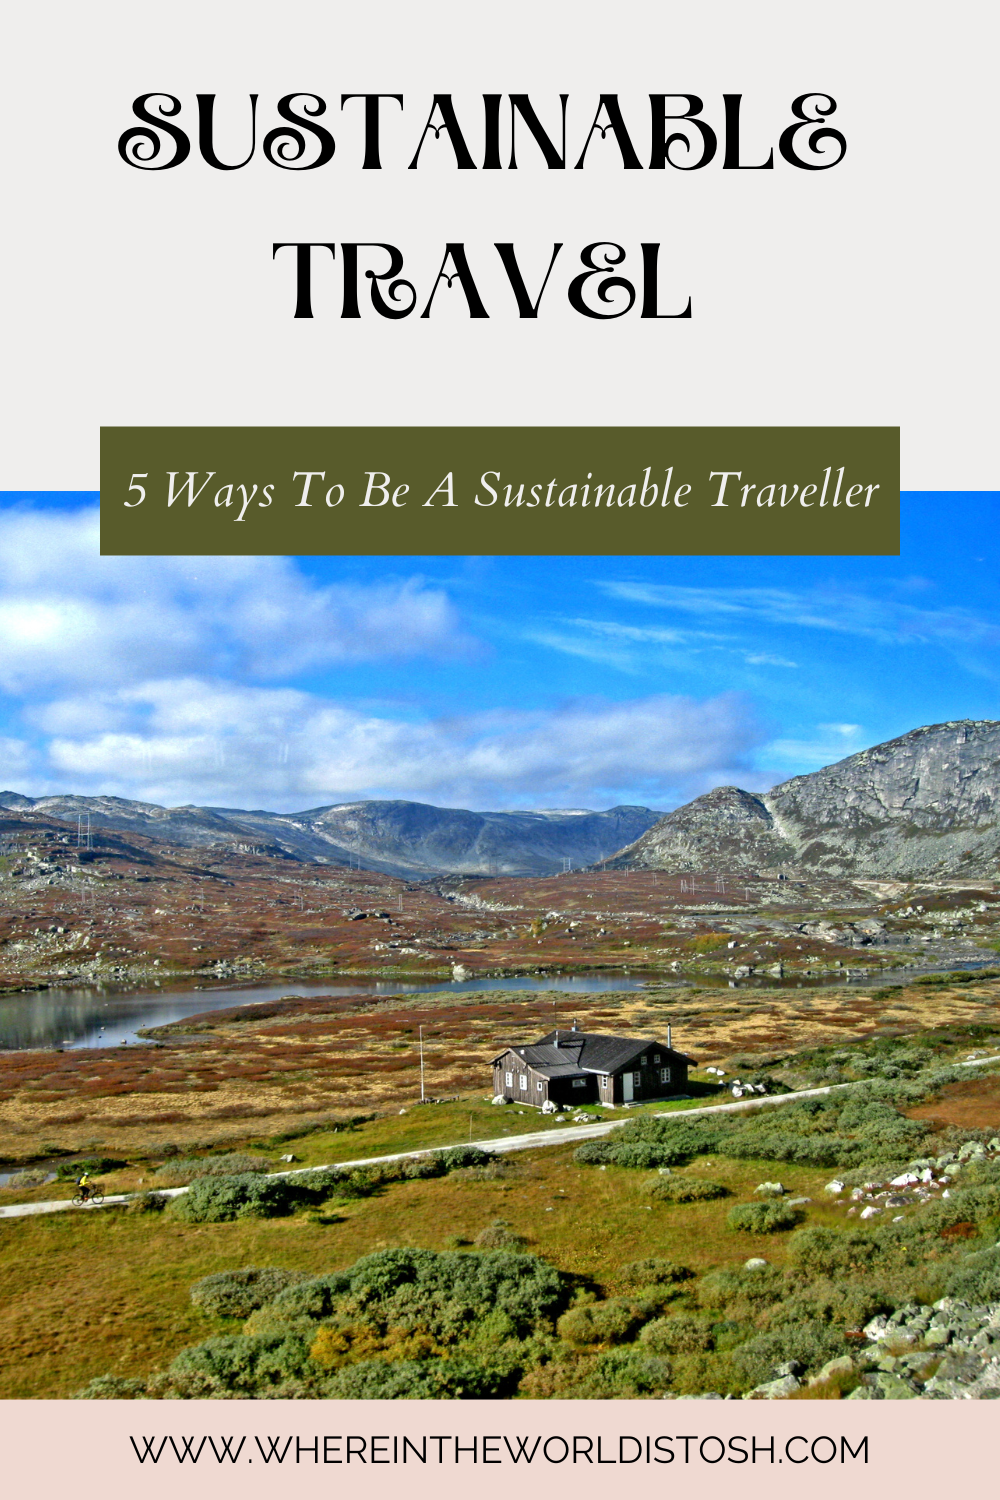 Sustainable Travel - 5 Ways To Be A Sustainable Traveller